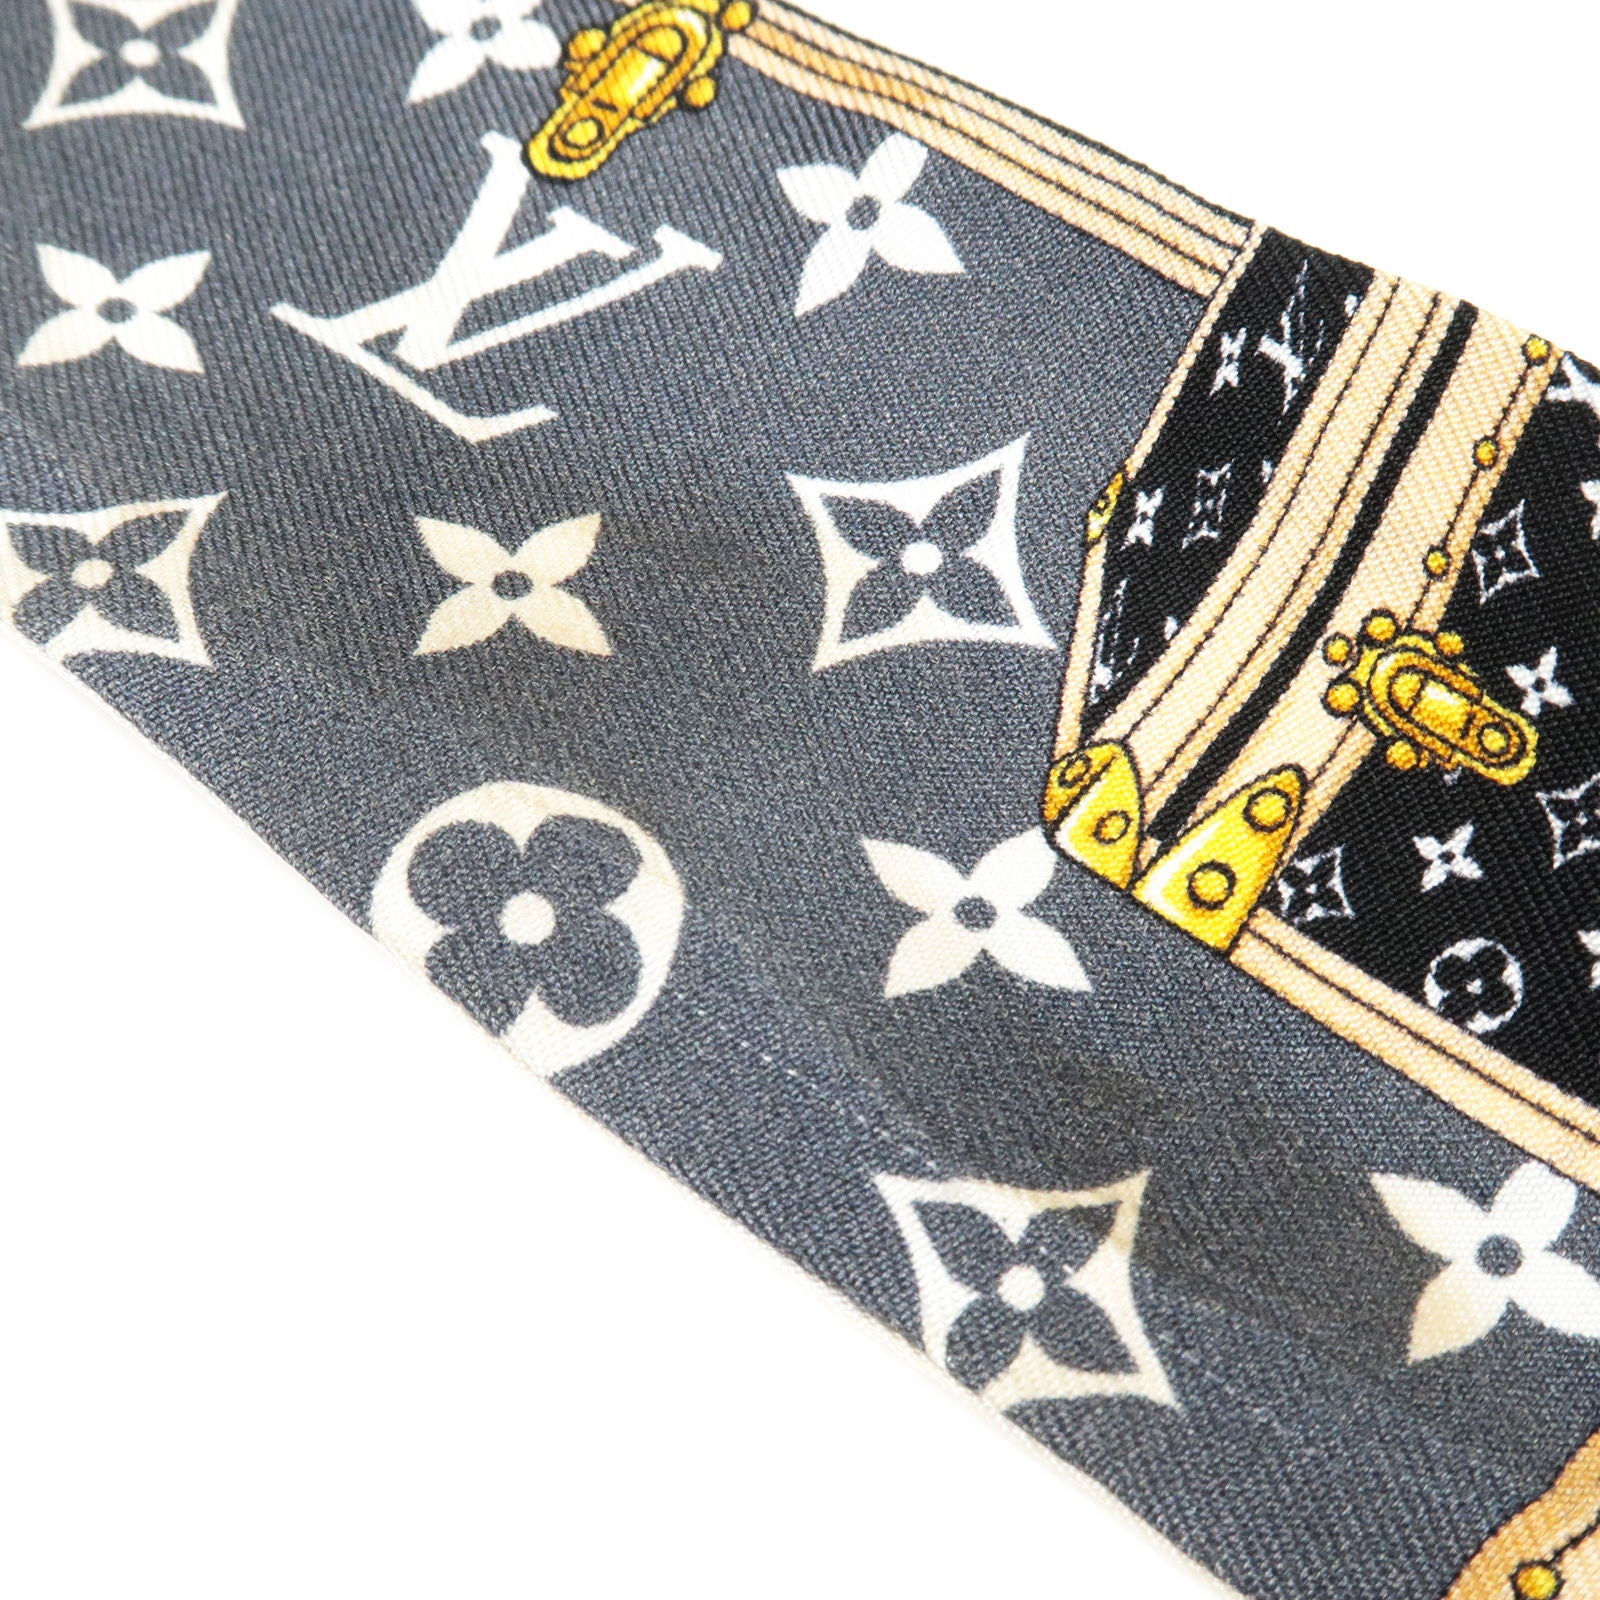 Buy [Used] Louis Vuitton Silk Bandeau BB Let's Go Scarf Scarf M76442 Black/White  Silk Scarf/Muffler M76442 from Japan - Buy authentic Plus exclusive items  from Japan